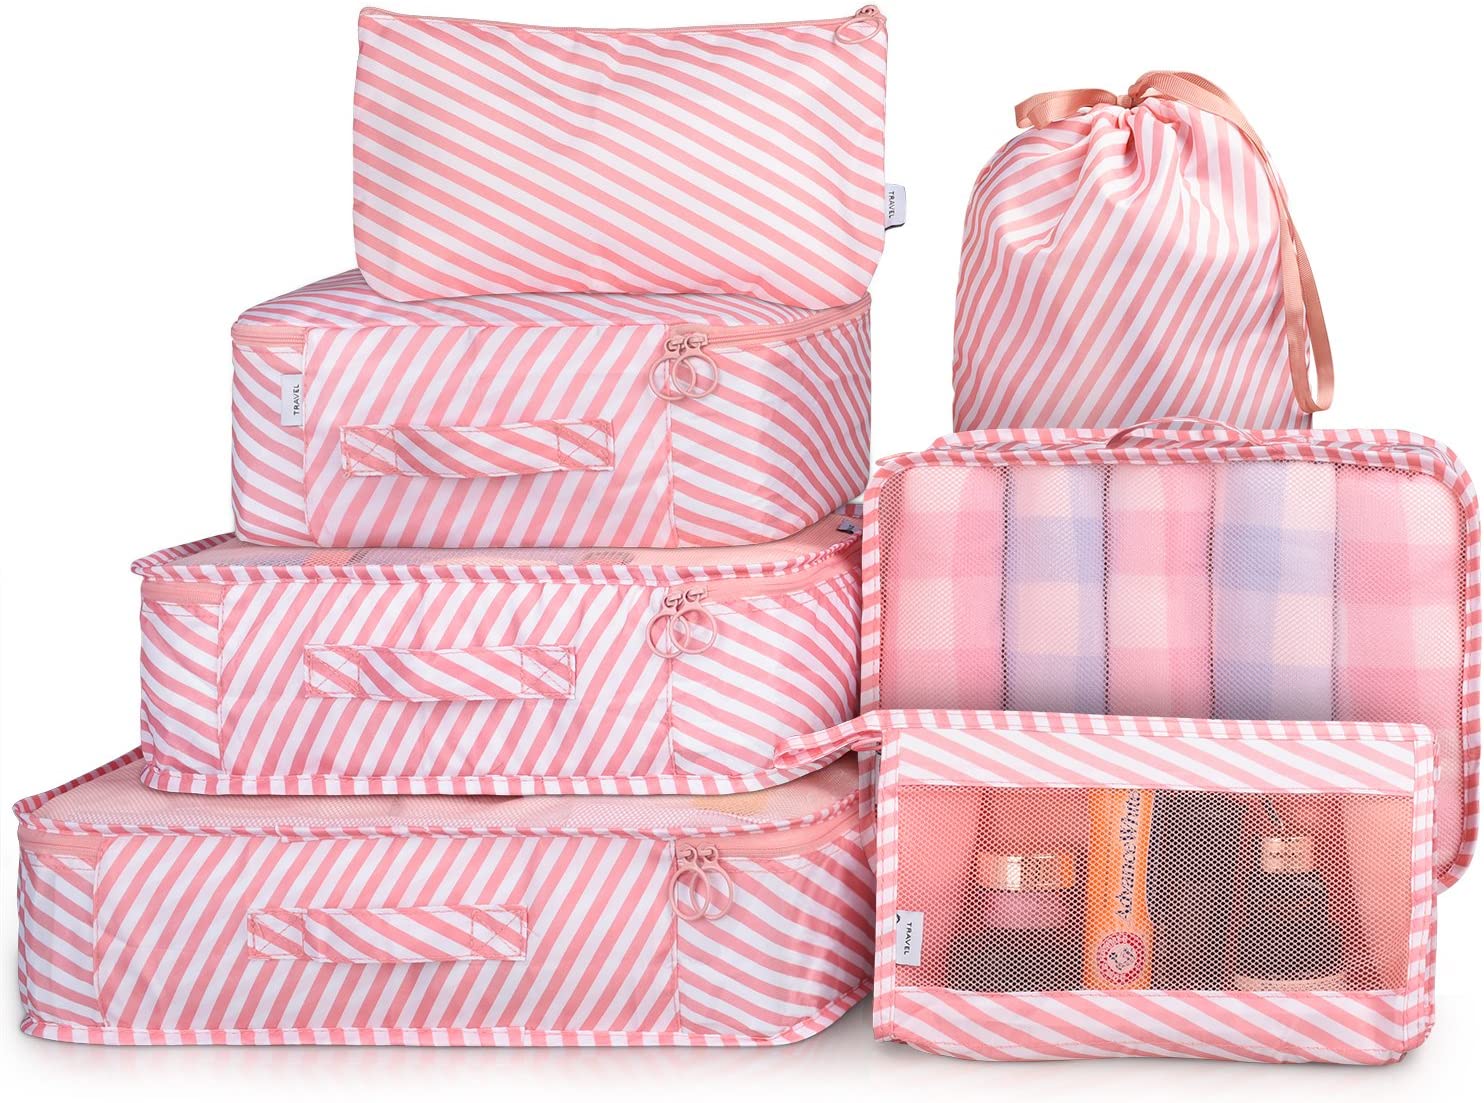 Travel Luggage Organizer Bags (7 Pieces, Pink Stripes Color).